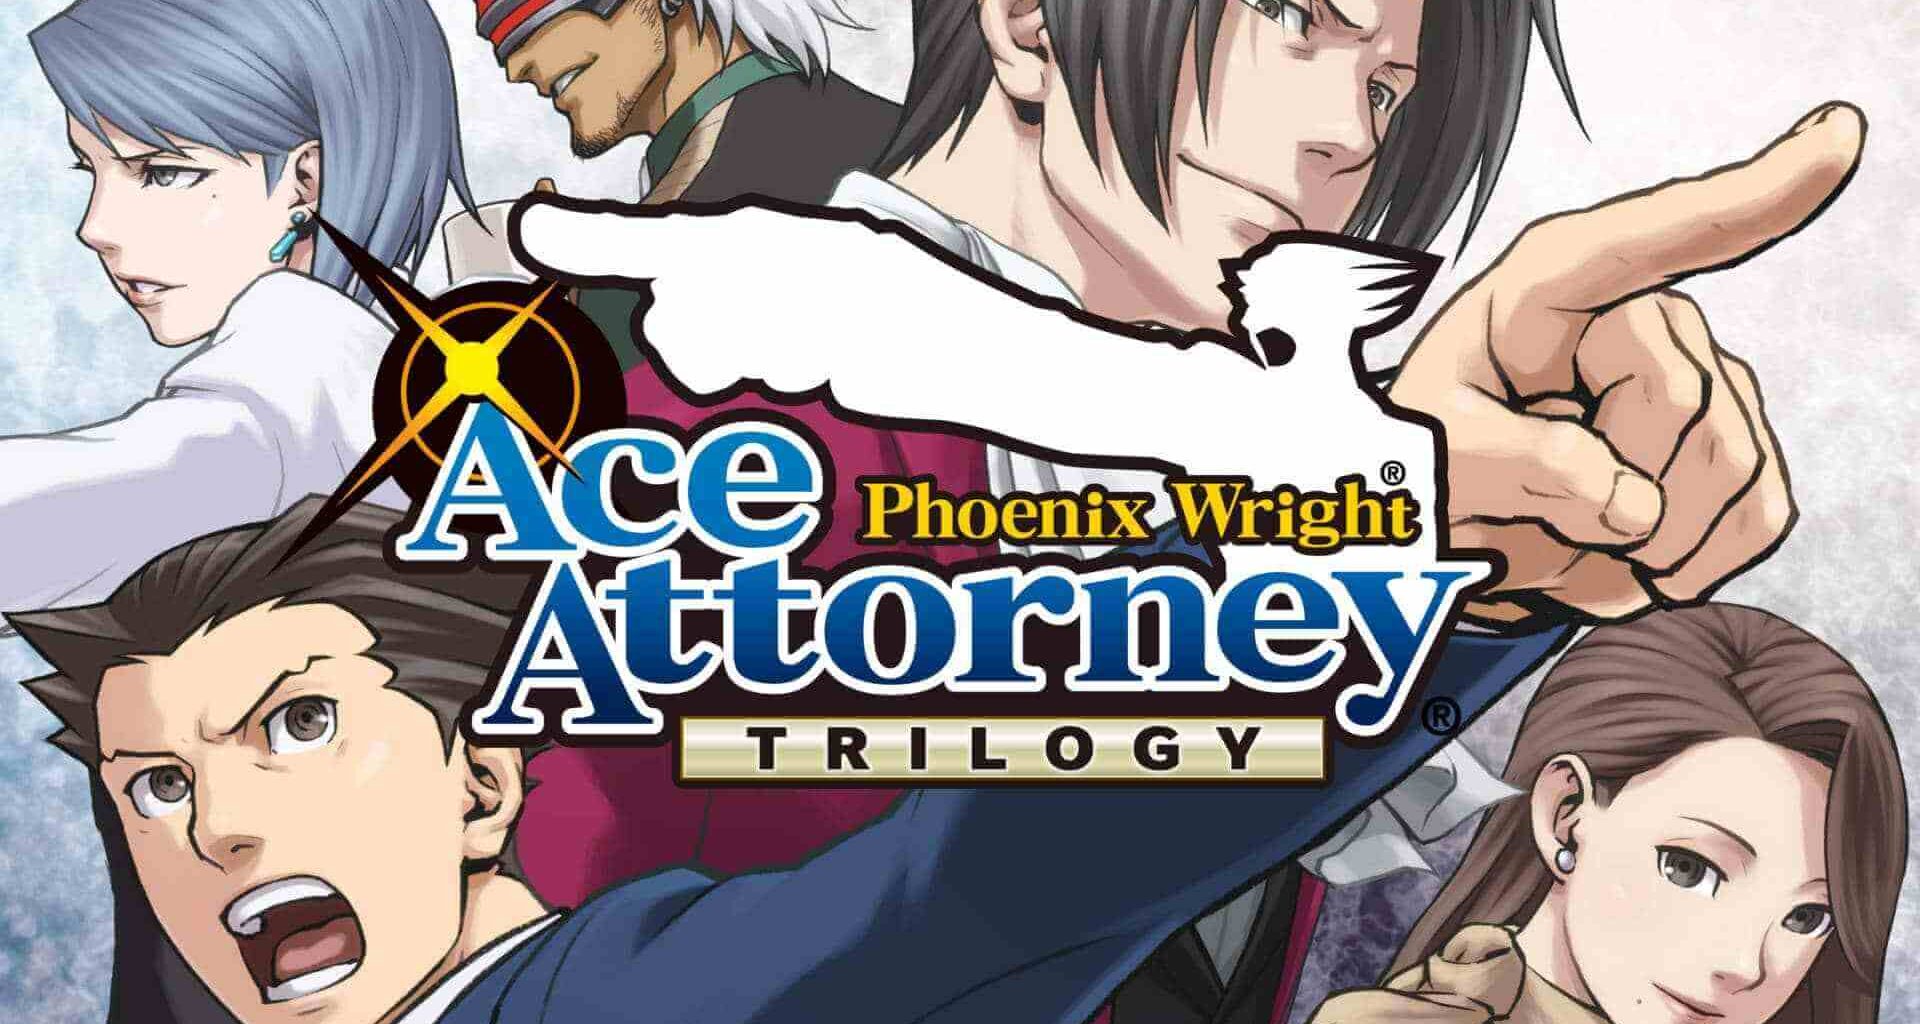 Phoenix wright ace attorney trilogy coming